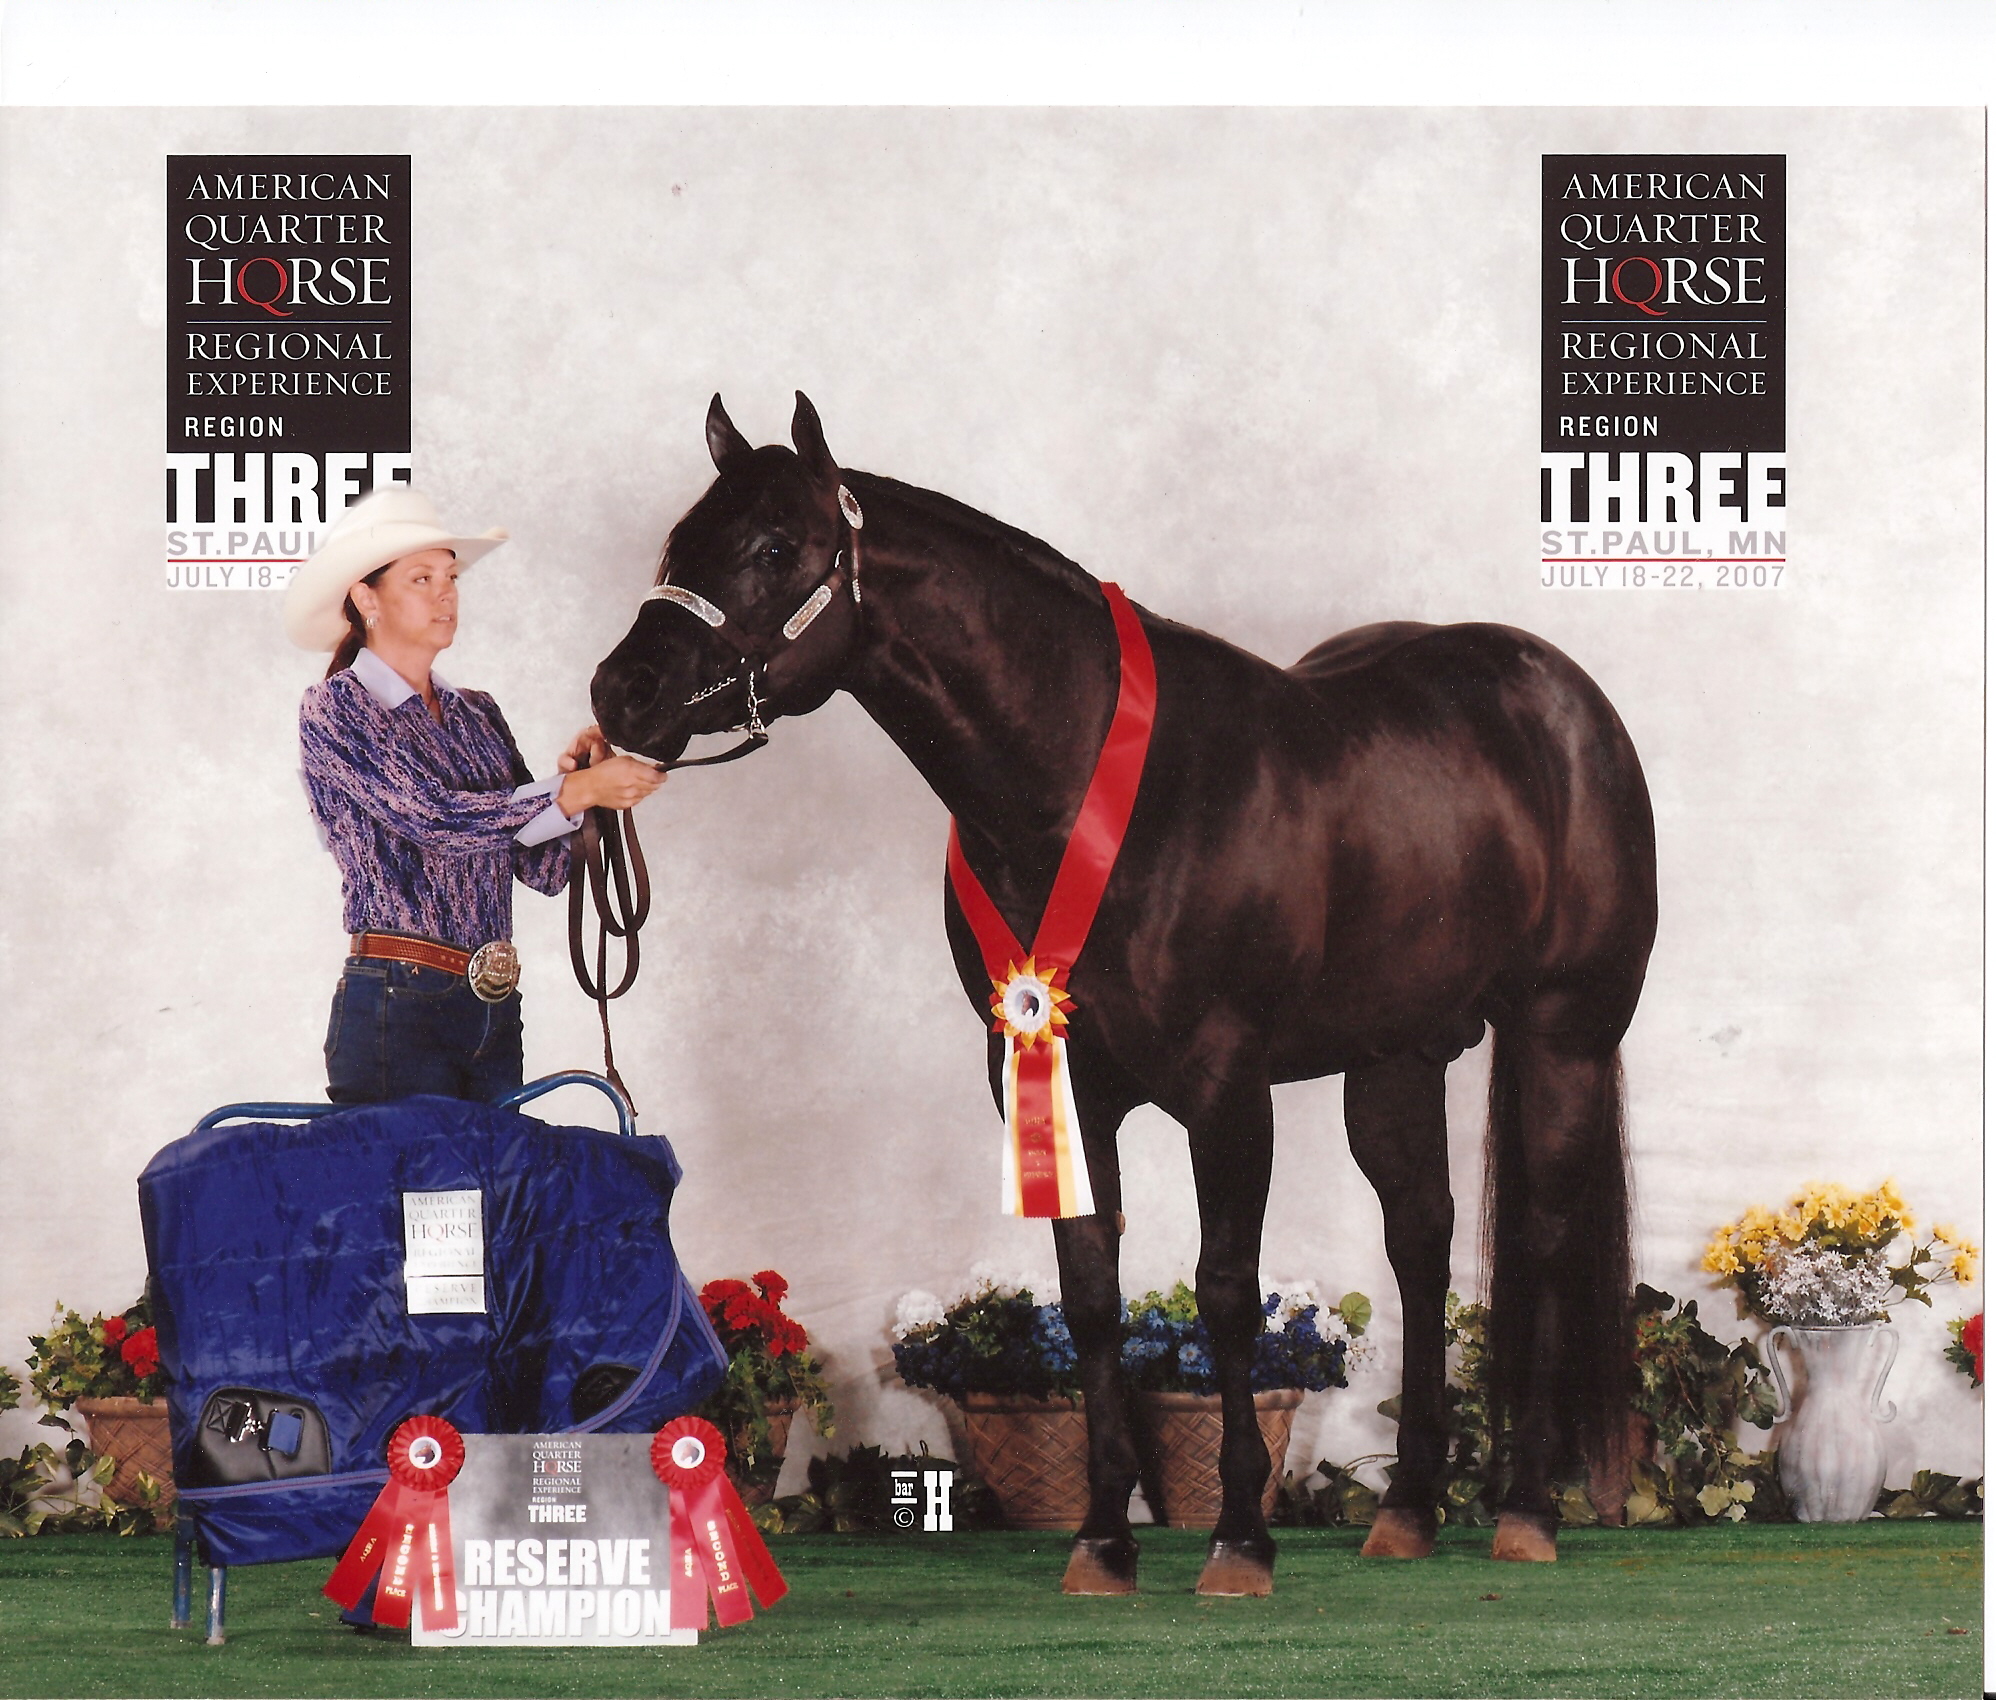 Repercussions - 2007 AQHA Regional Experience Reserve Champion!